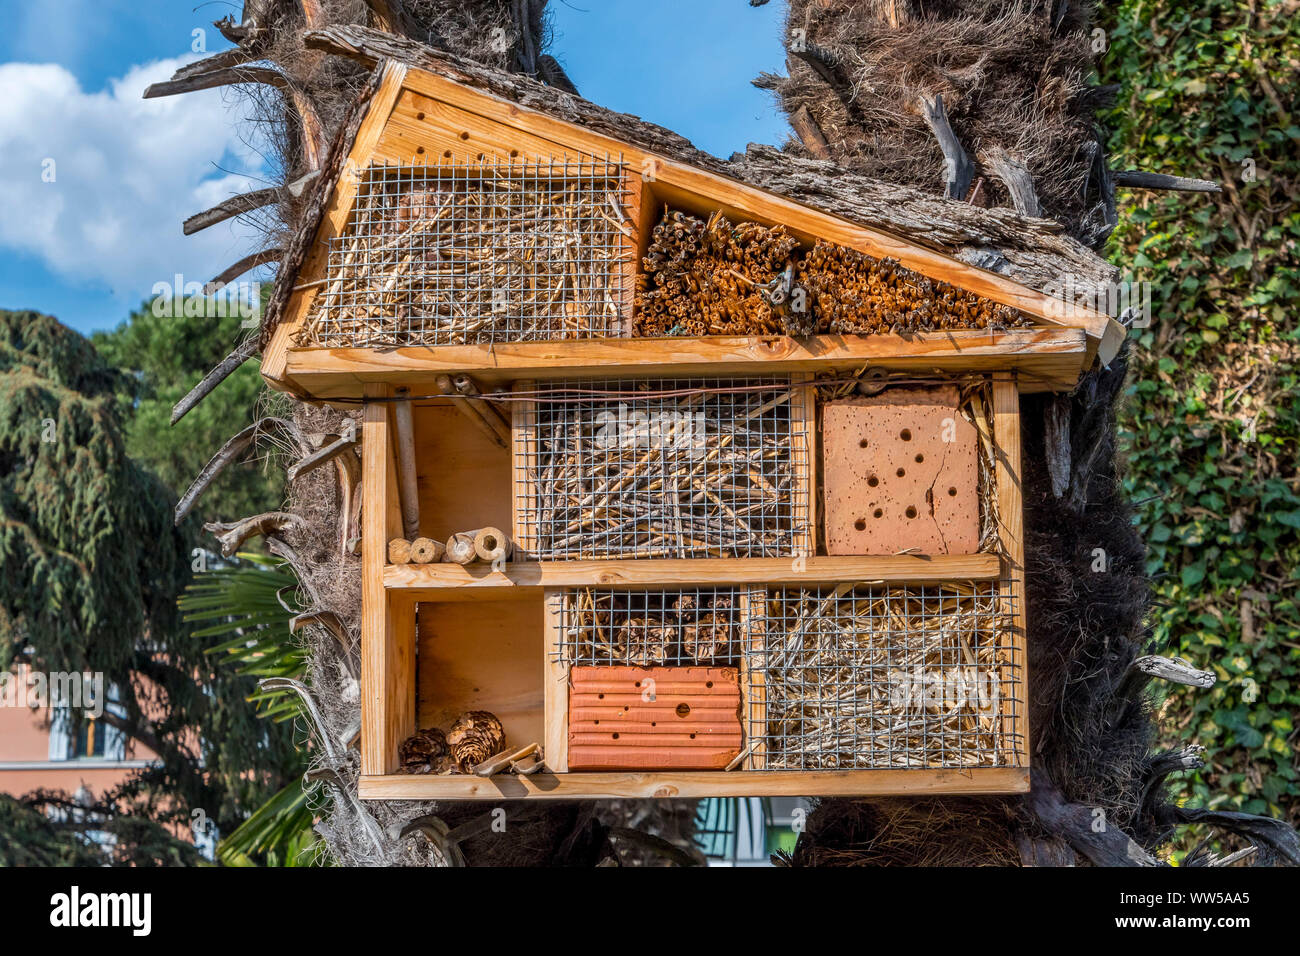 Insect hotel in Merano, South Tyrol, Italy, Europe Stock Photo